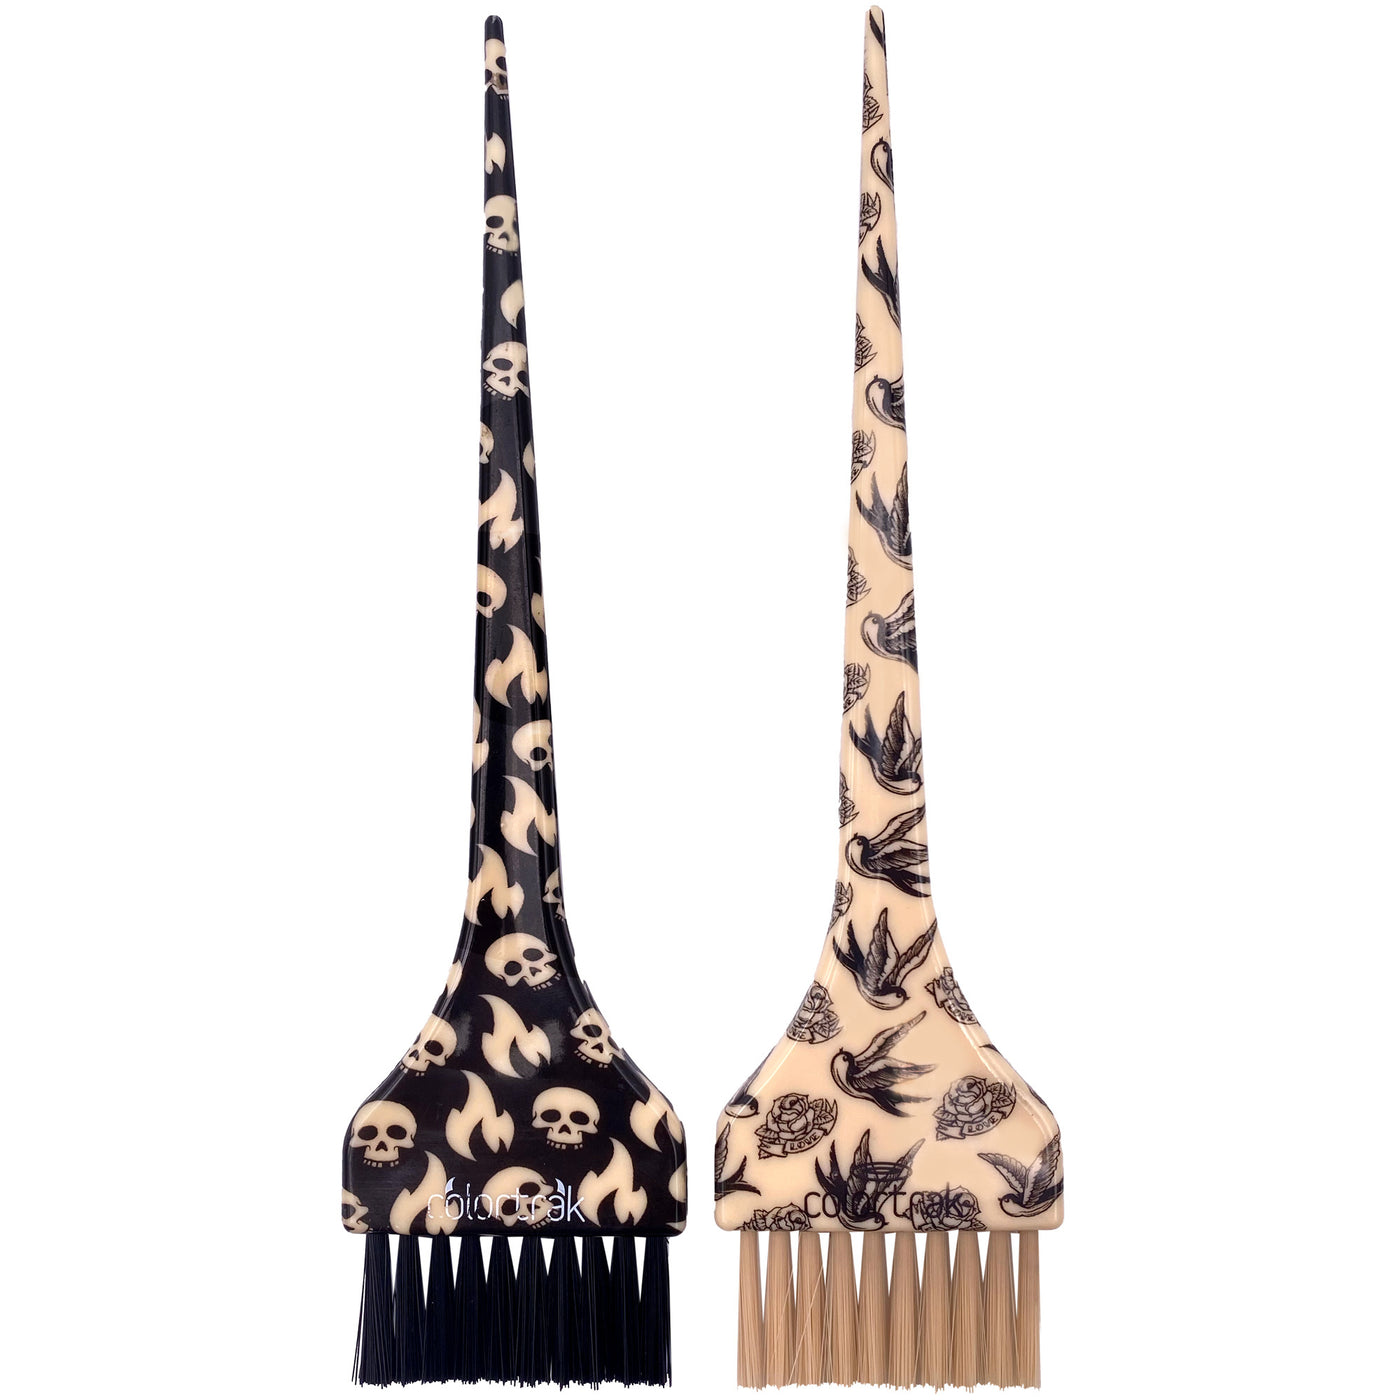 Naughty & Nice Collection Brushes 2pk